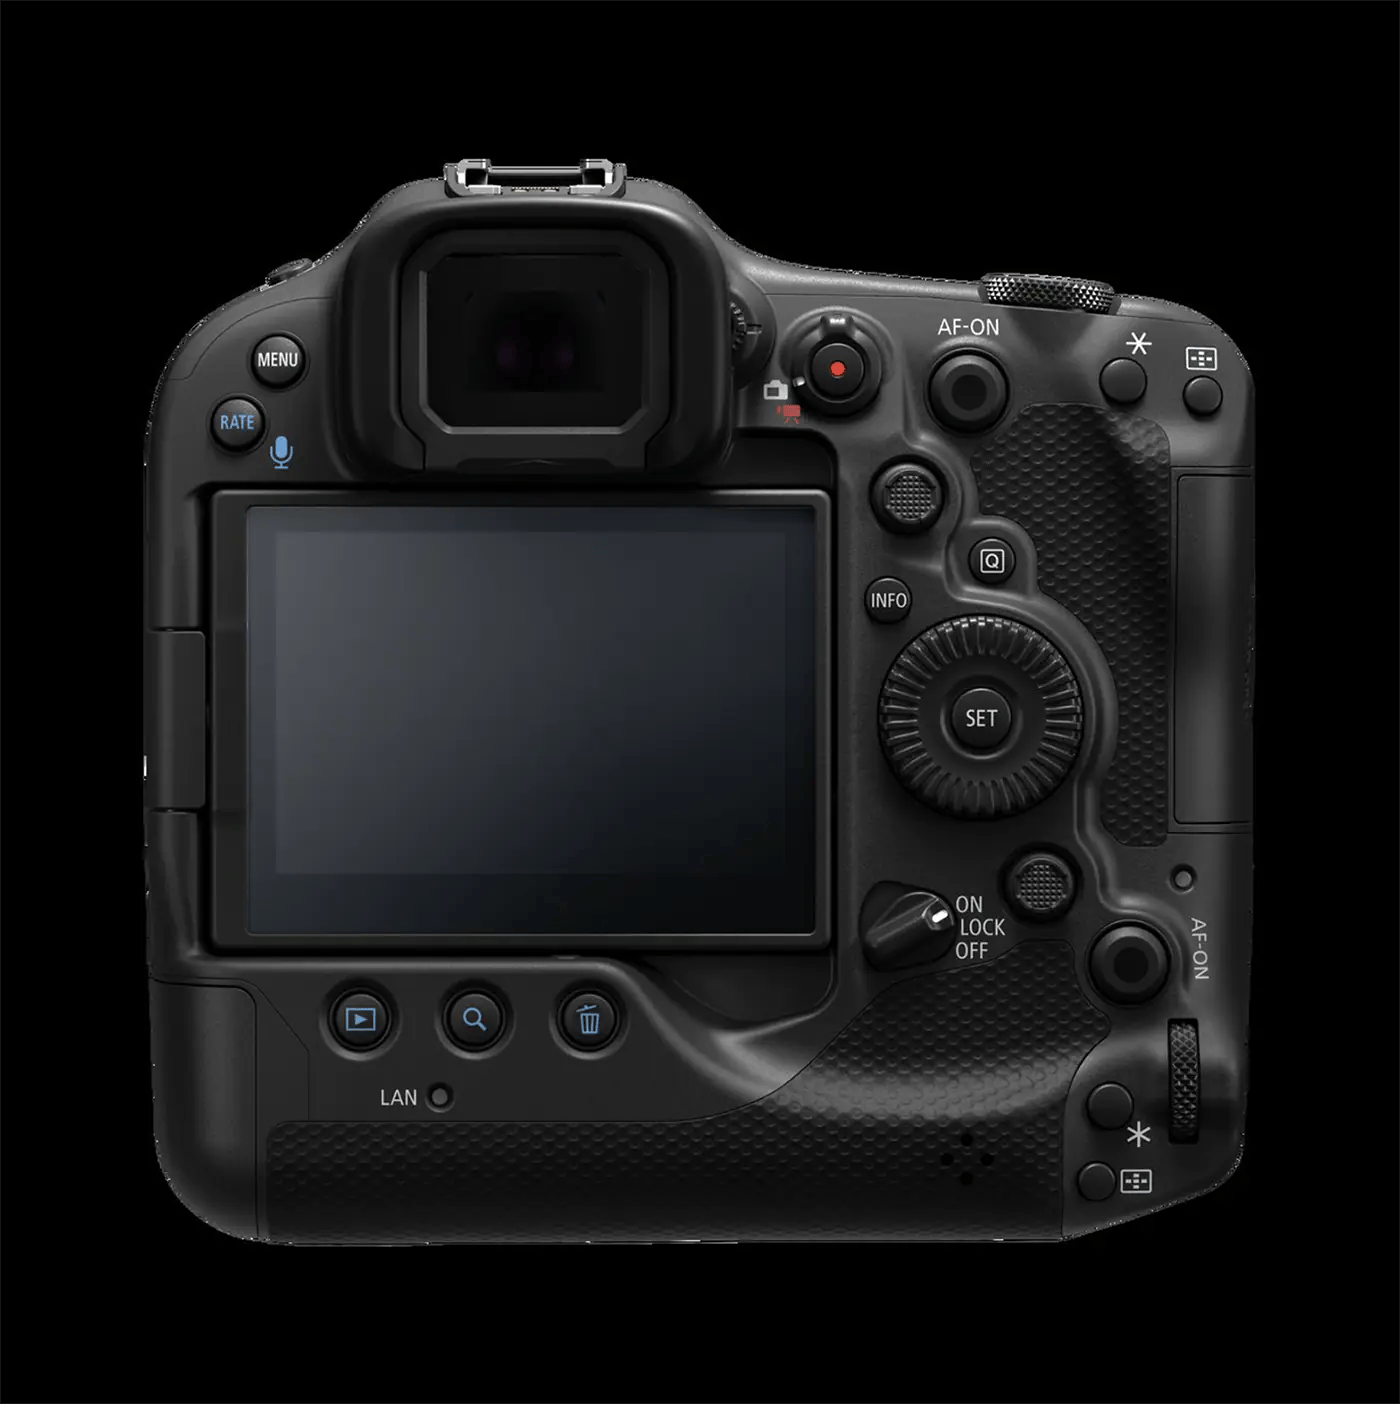 Rear view of the EOS R3.